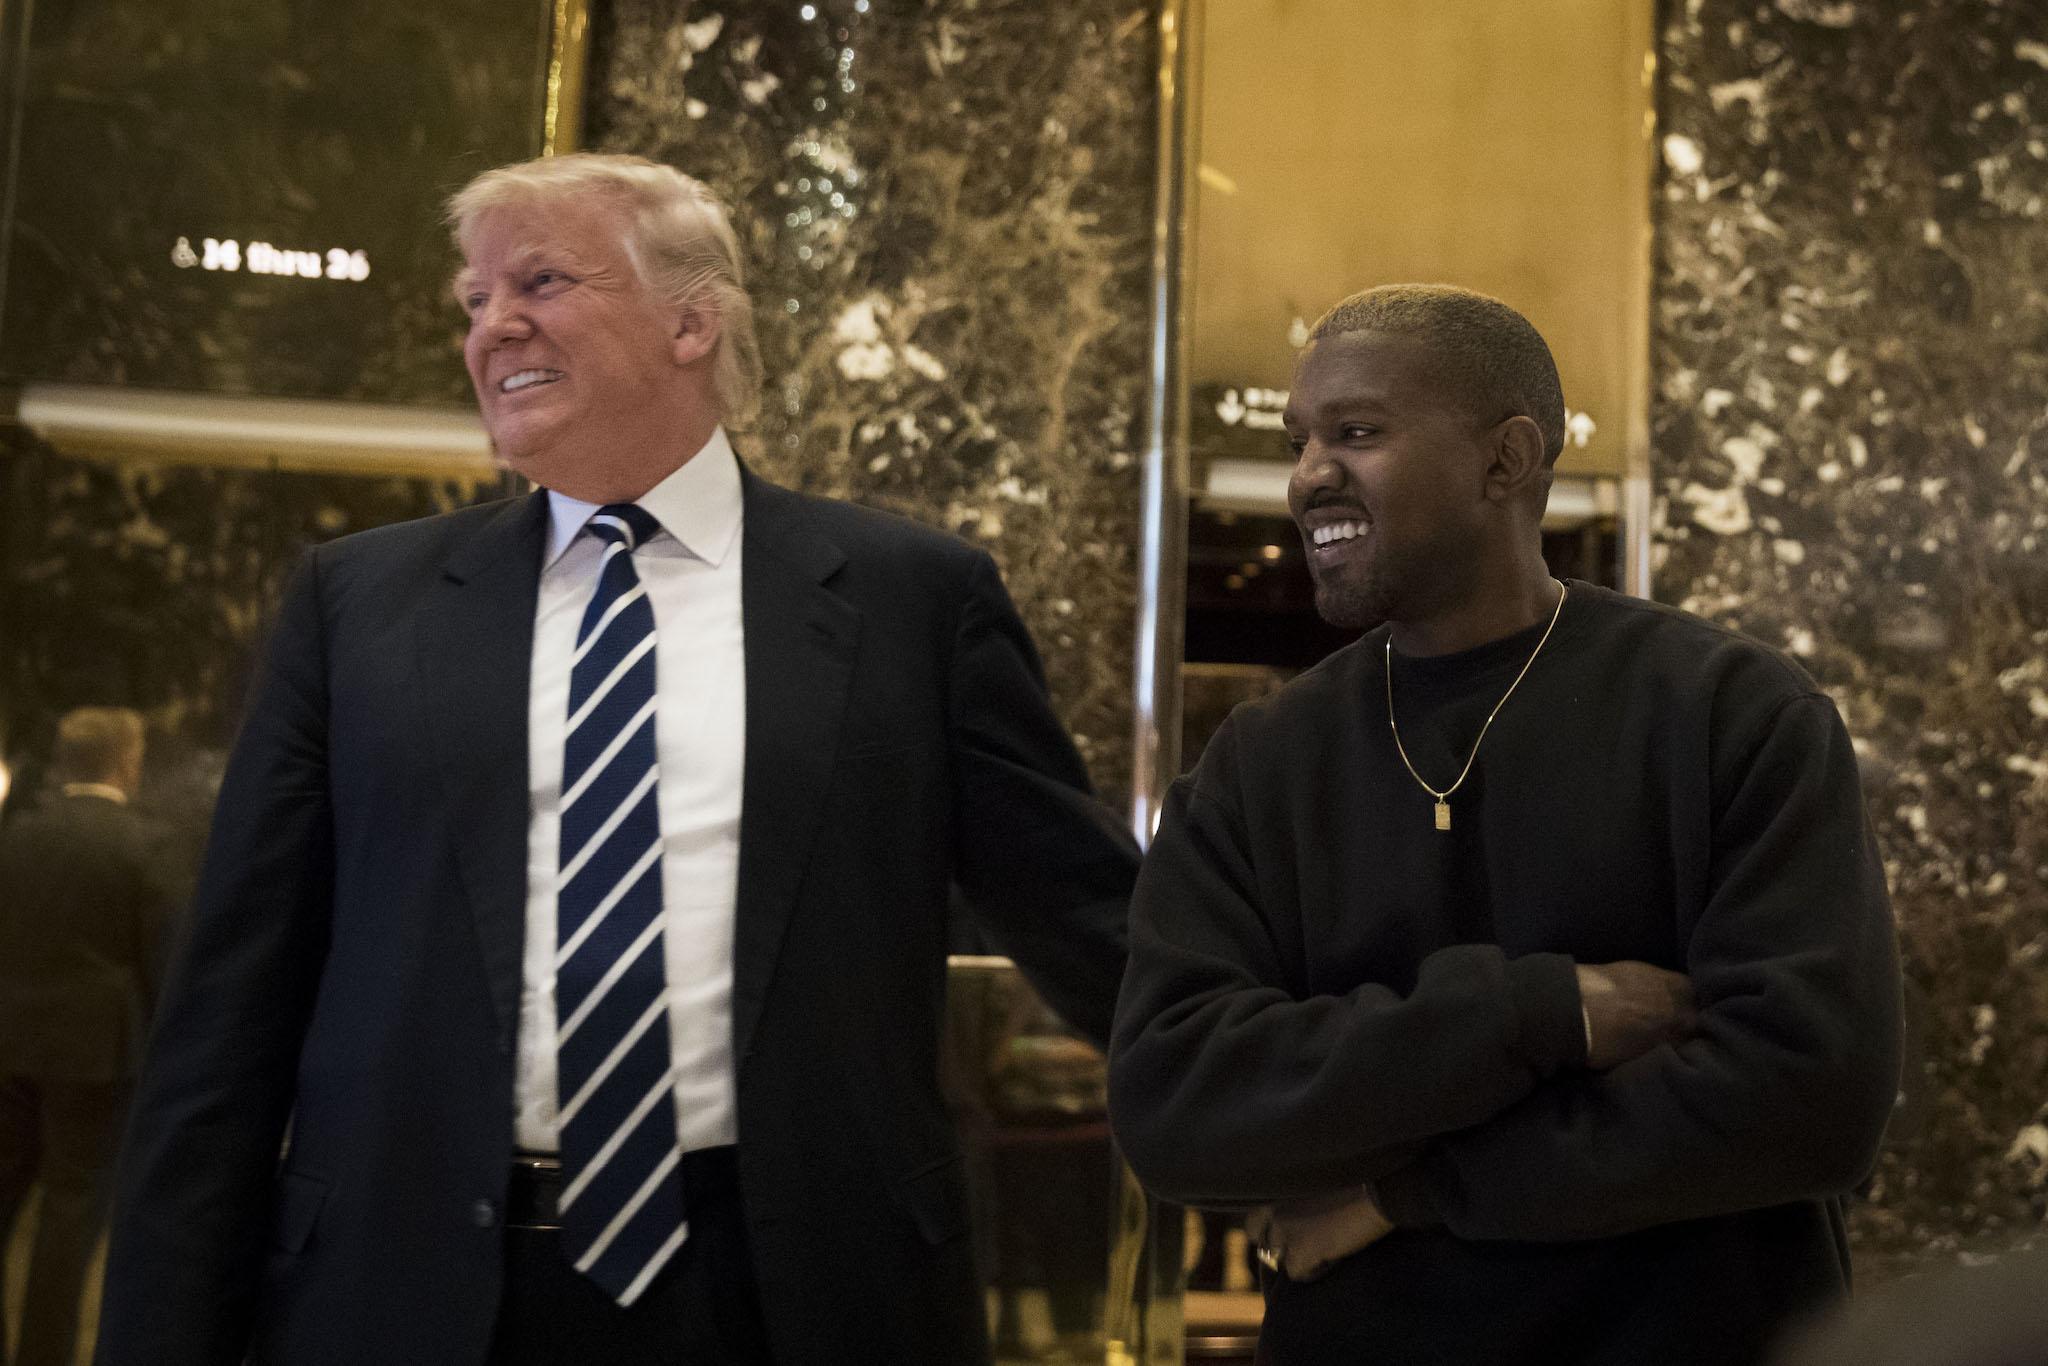 The rapper said Donald Trump was ‘his brother’ and Trump responded, ‘Very cool!’